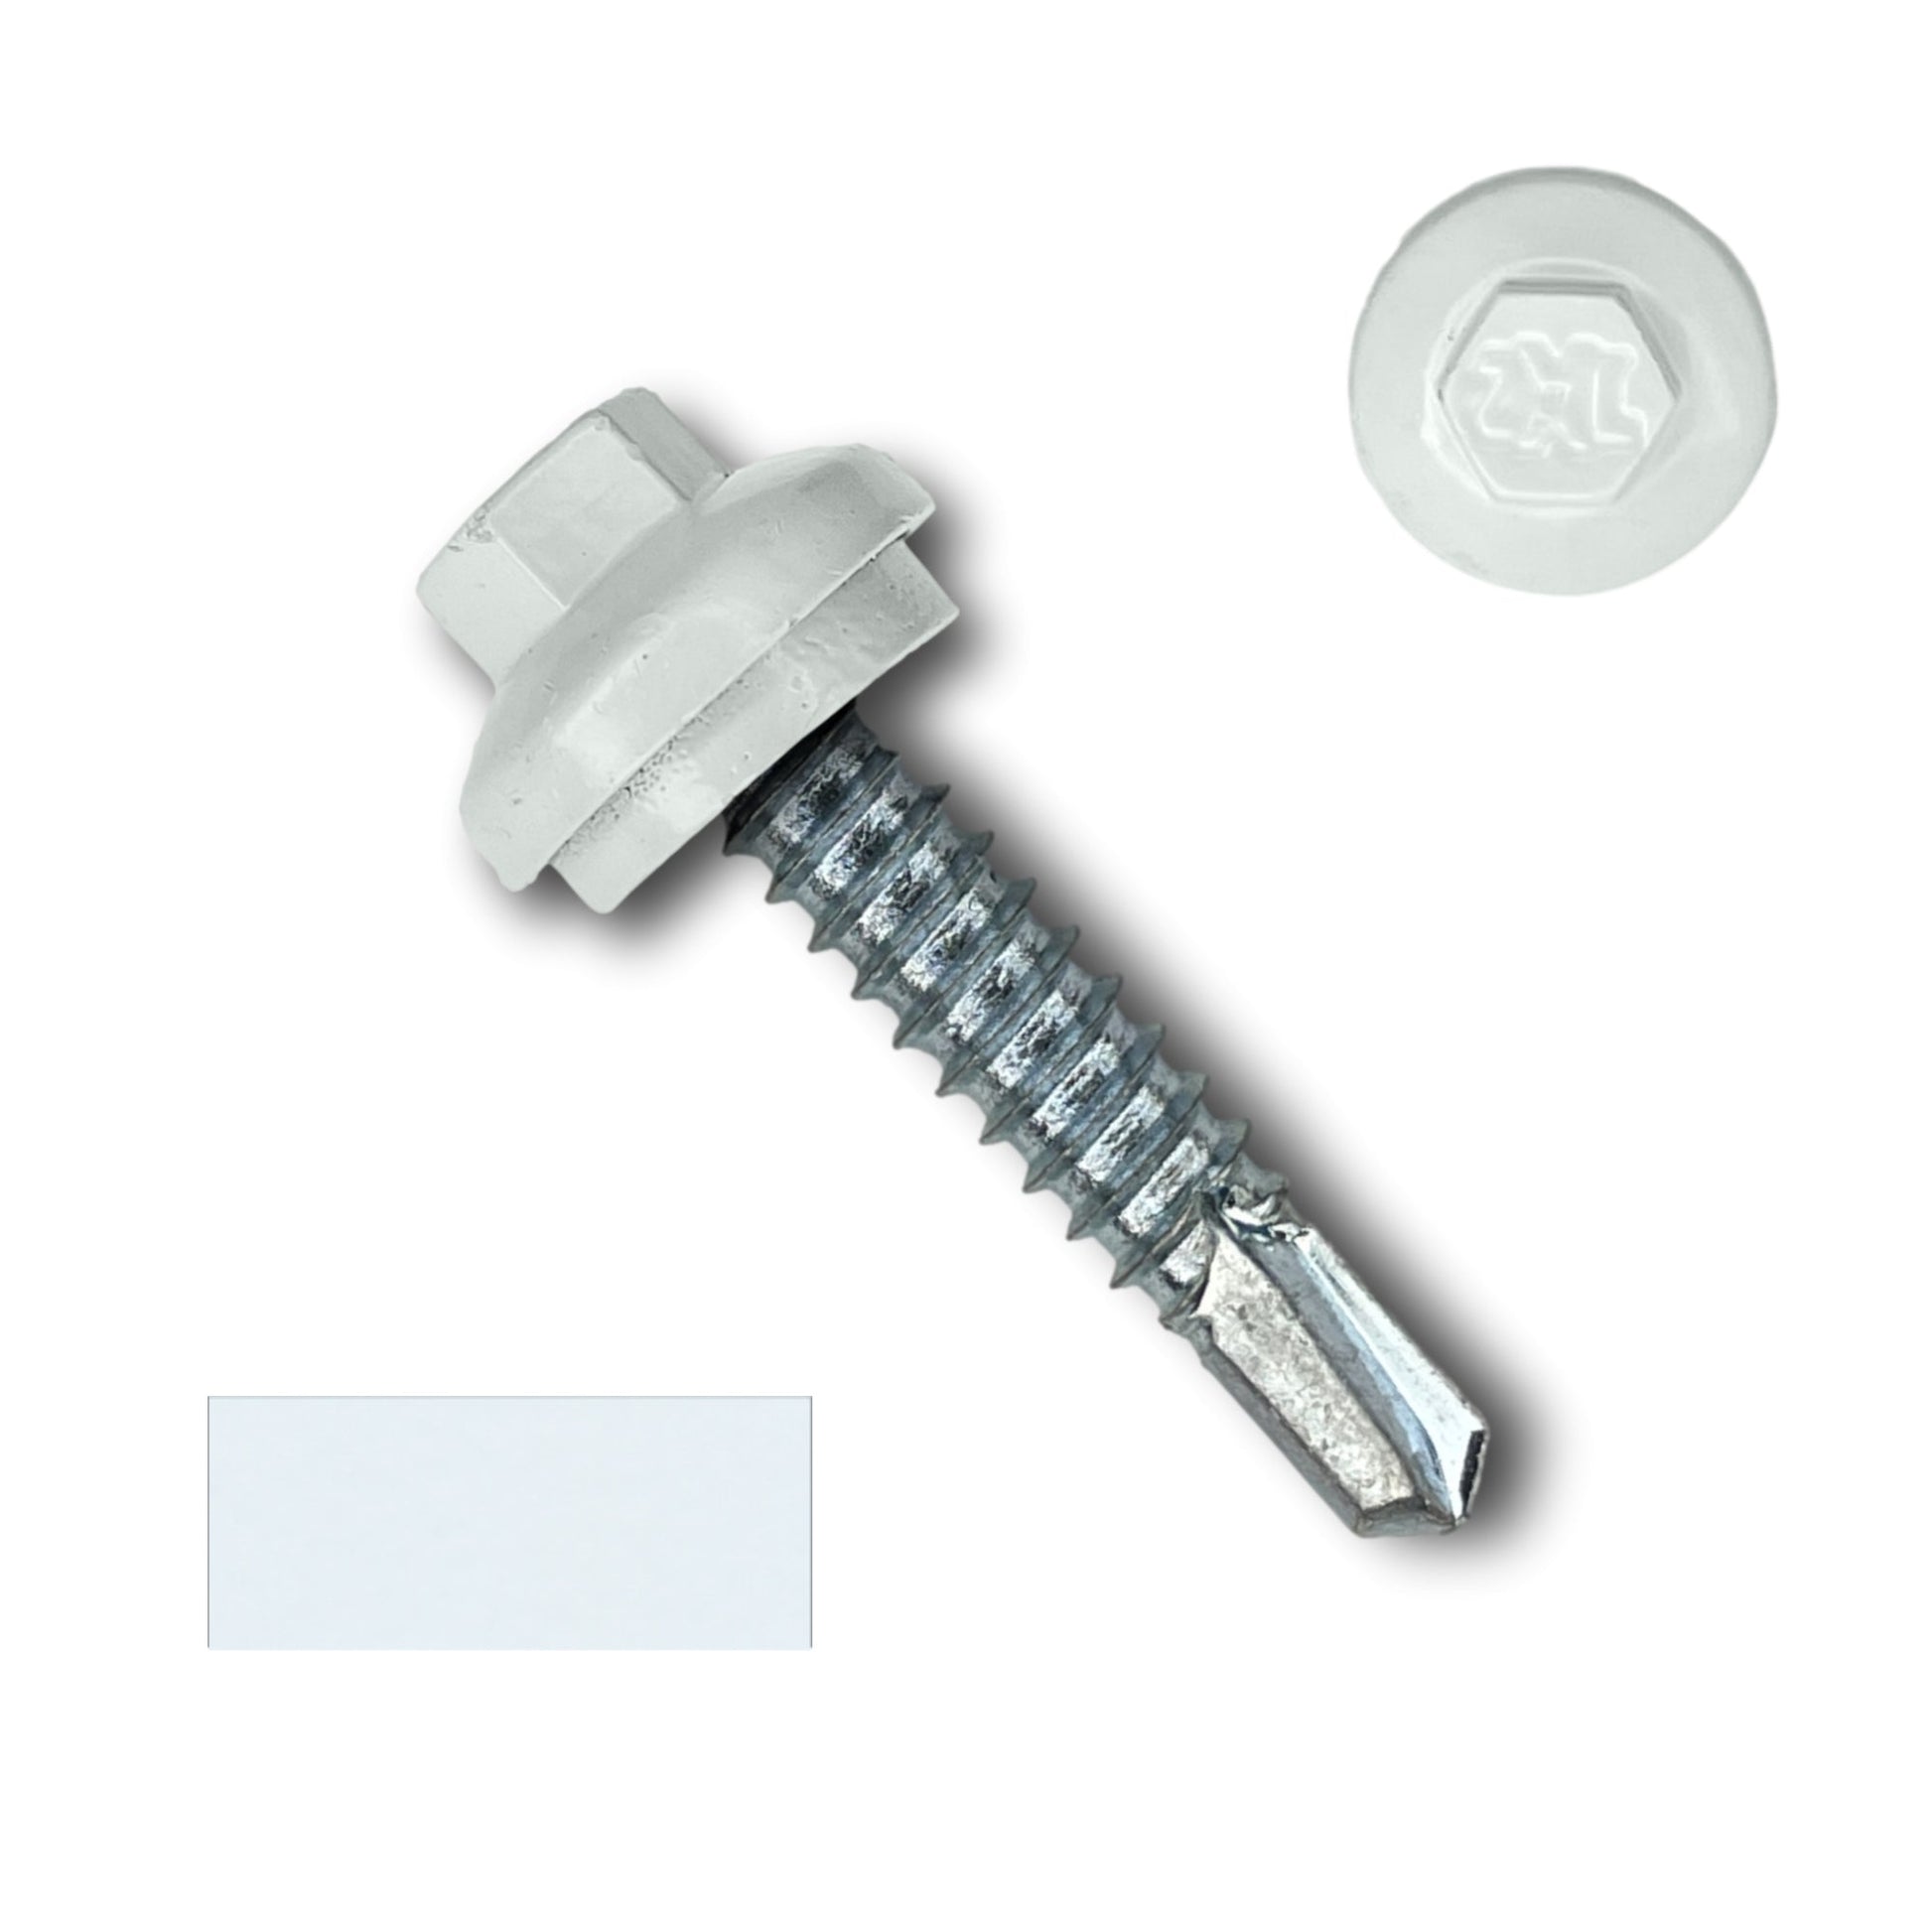 A Perma Cover #14 x 1.25" ZXL Dome Cap Metal Building Screw (Metal-to-Metal), Self-Drilling, shown alongside a loose ZXL Dome Cap. The screw and cap are placed on a white background.